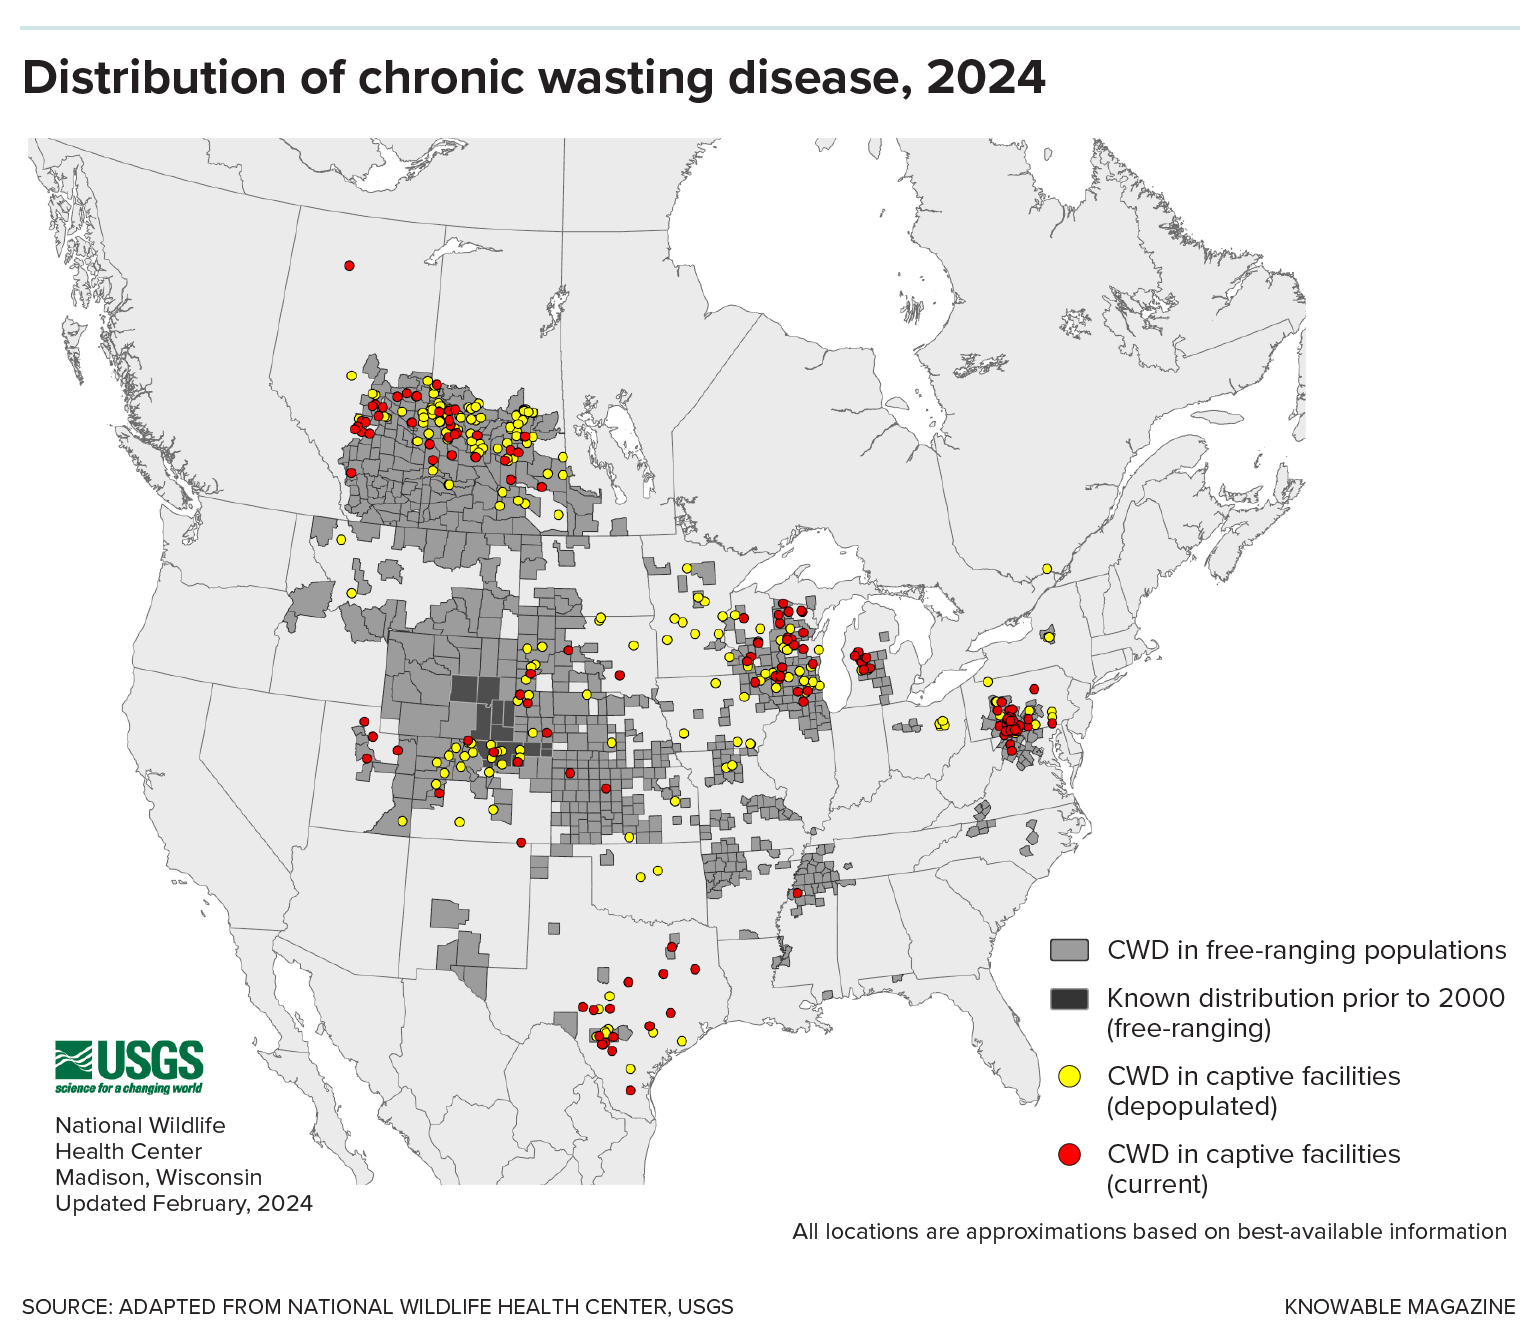 Once restricted to a handful of counties in Colorado and Wyoming, chronic wasting disease has spread to 32 states and several Canadian provinces, where it affects both wild and farmed deer populations. Credit: Knowable Magazine